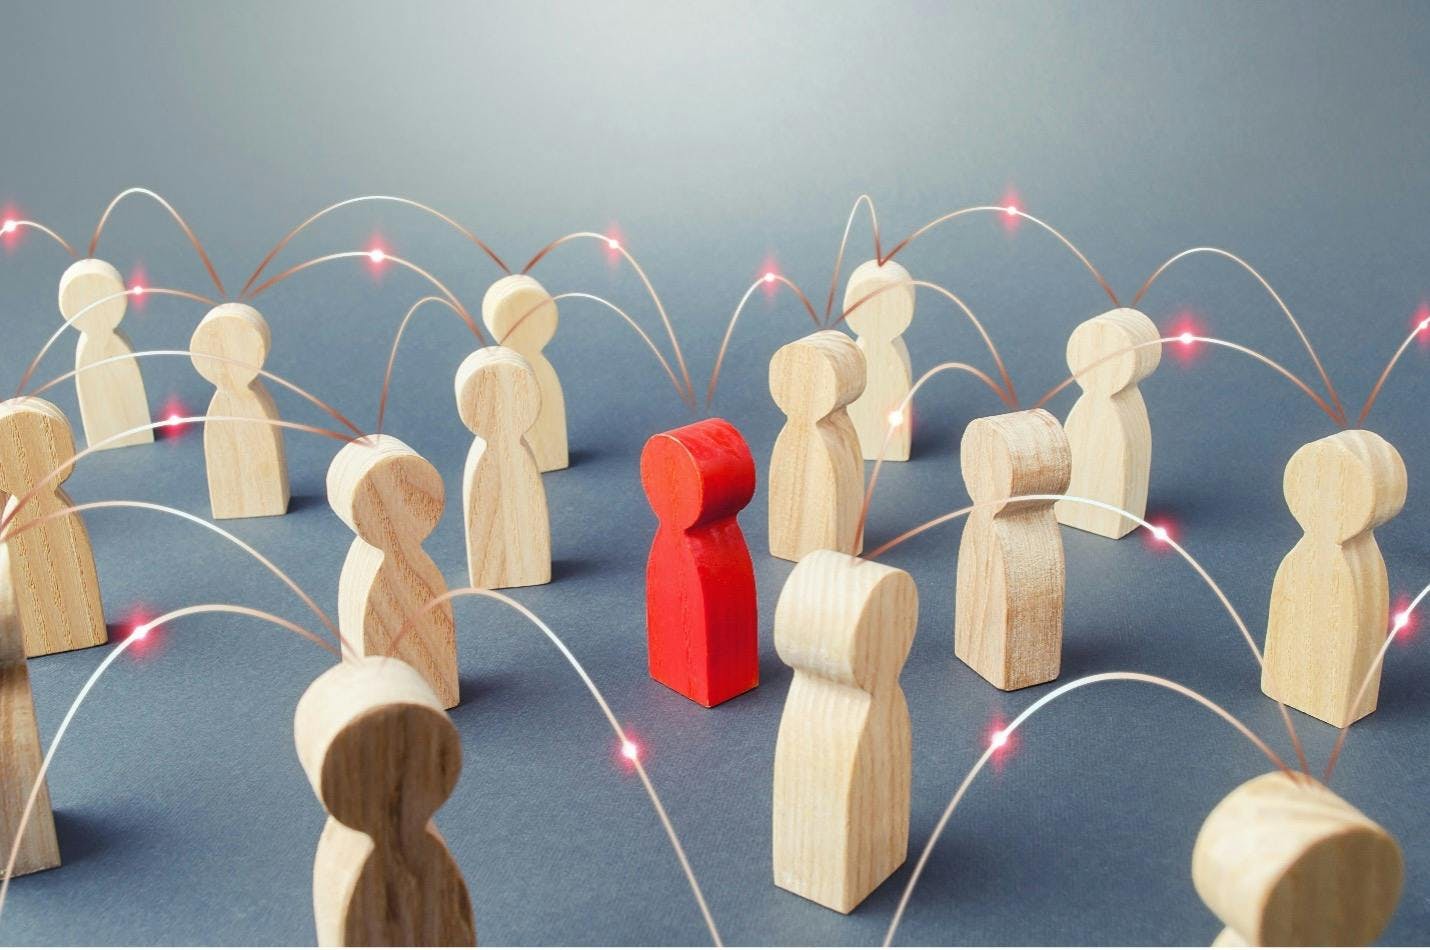 A red wooden figure connects with plain wooden figures in this image for a blog about user-generated content.